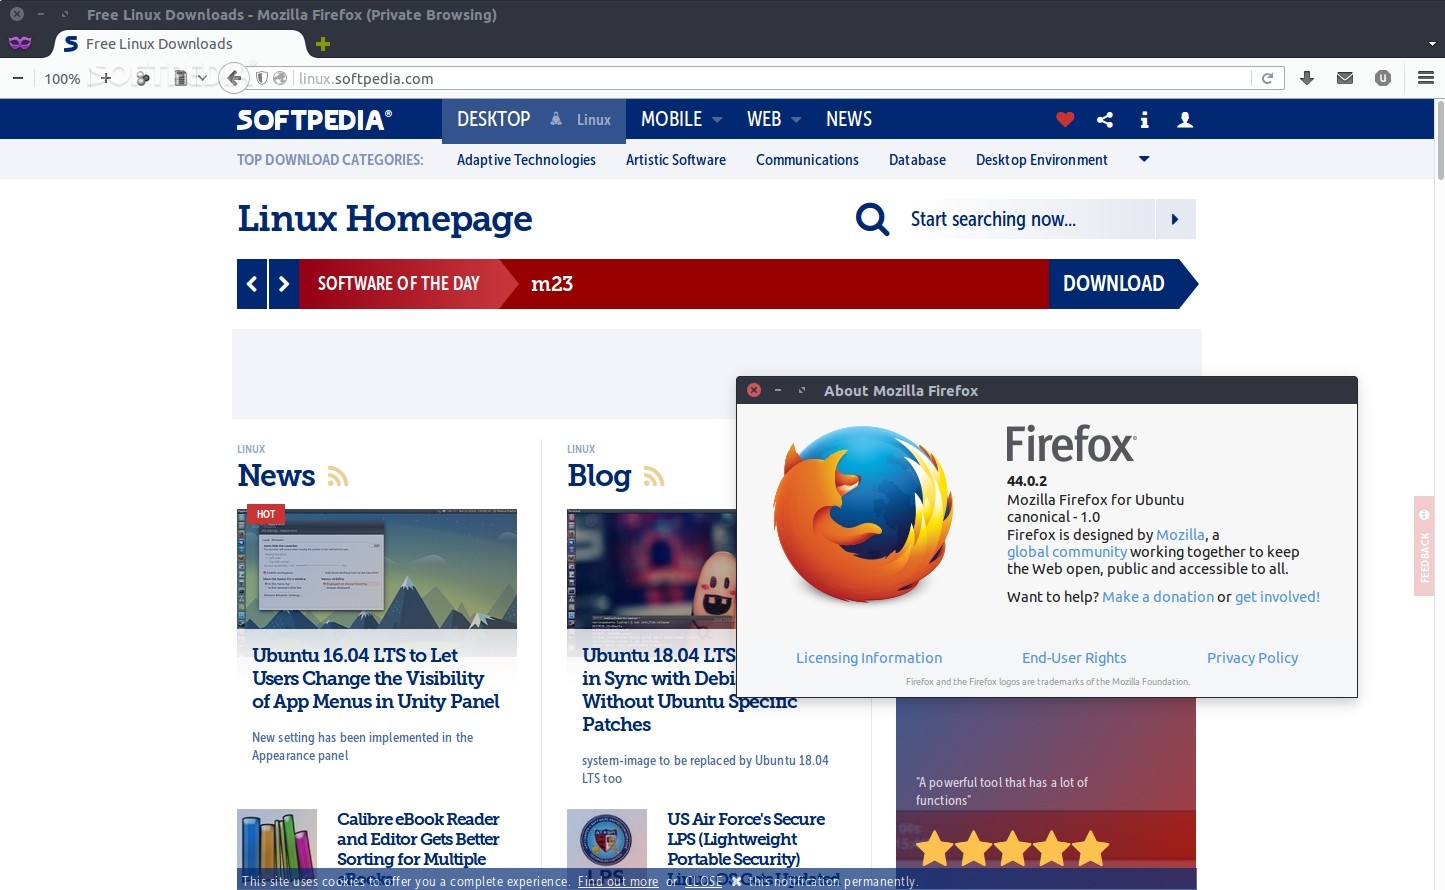 firefox for os x 10.6.8